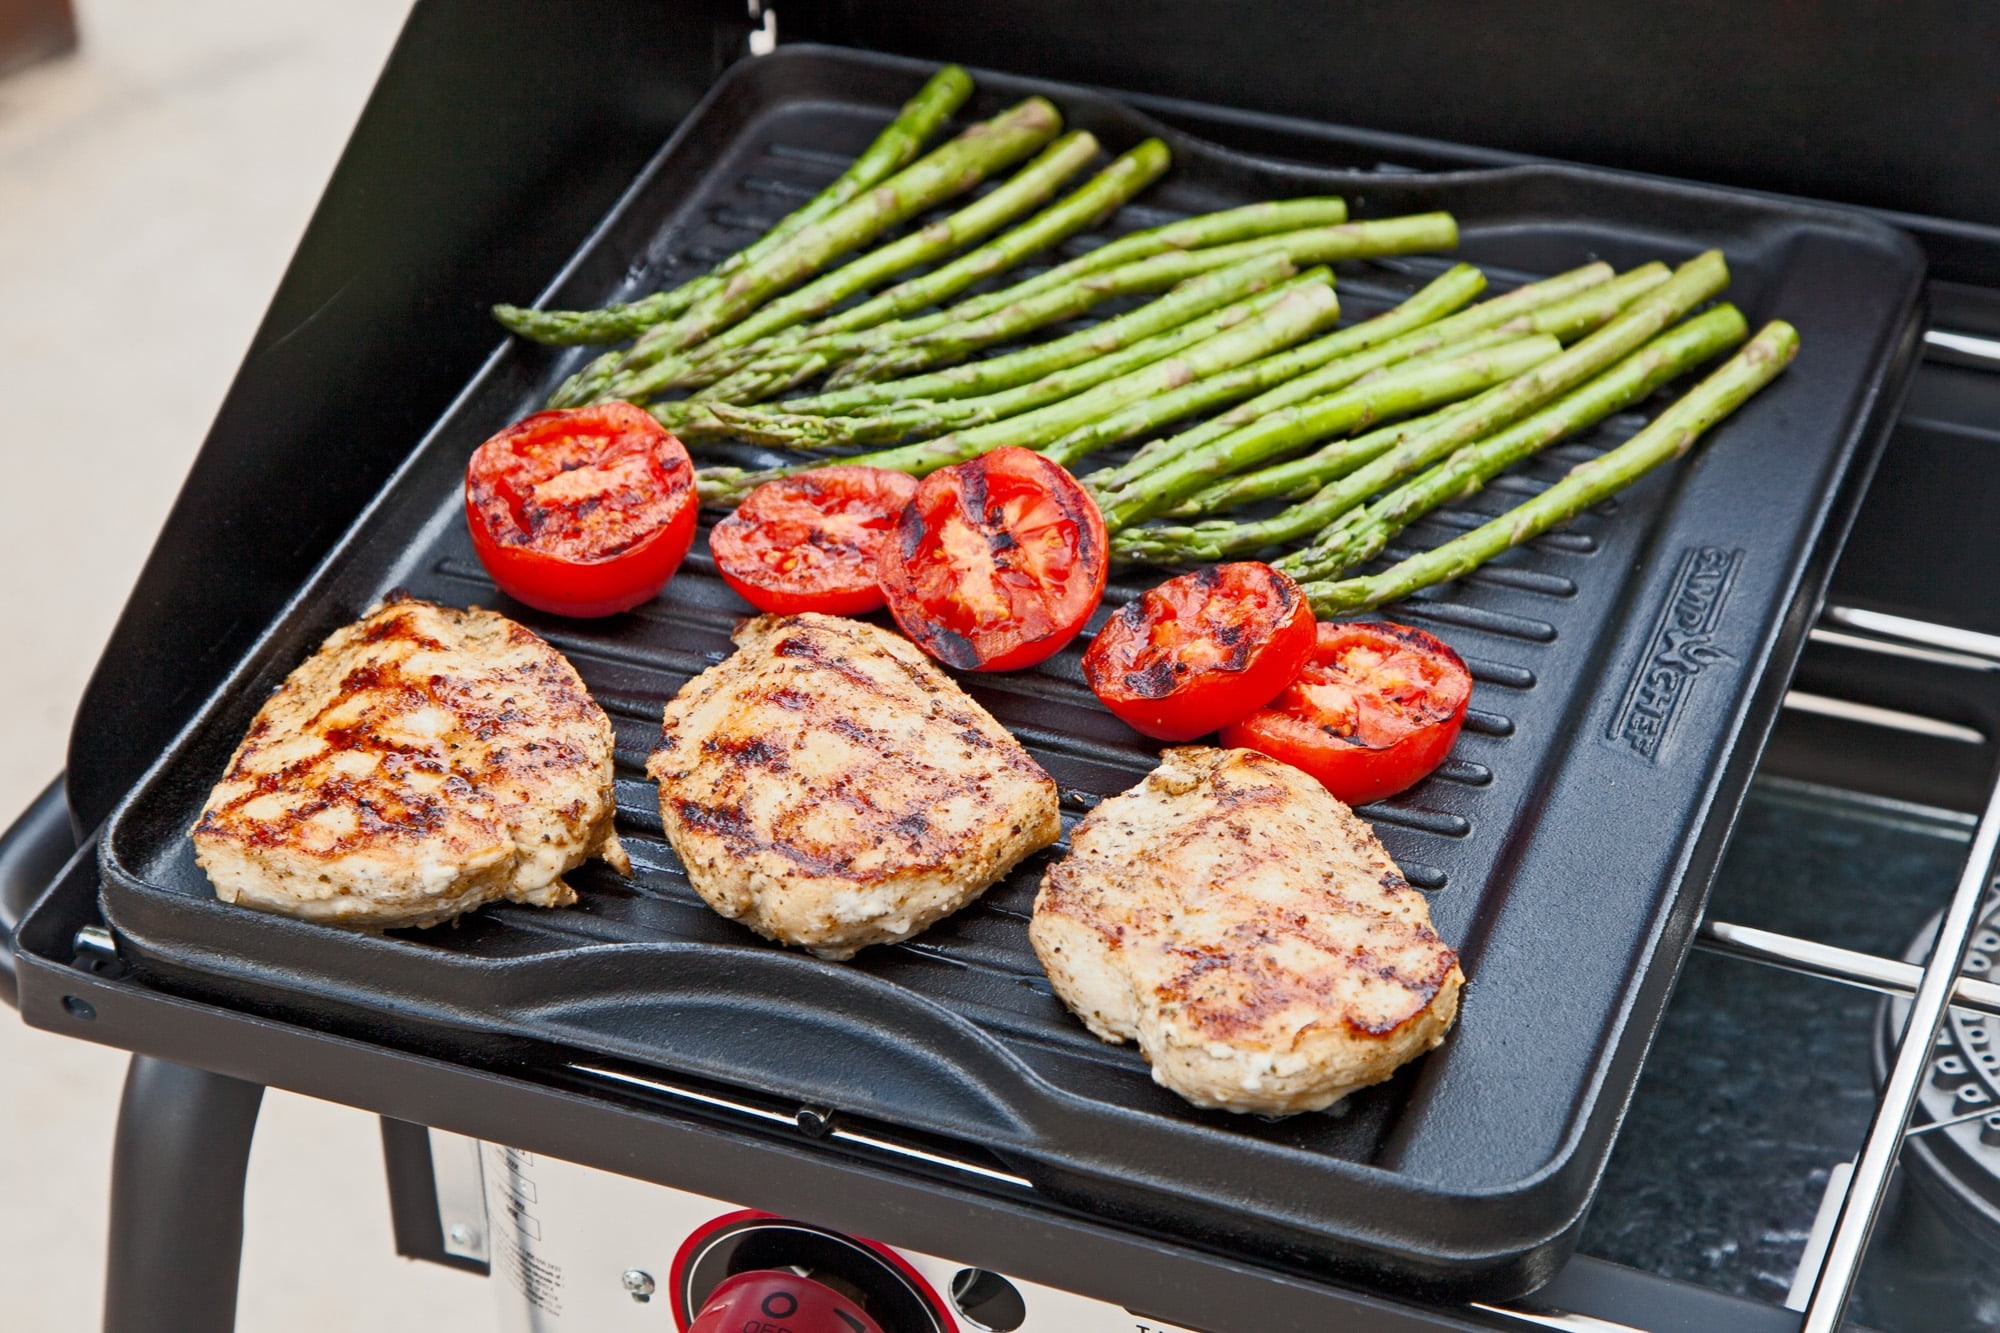 Reversible Grill Griddle, Chef Collection